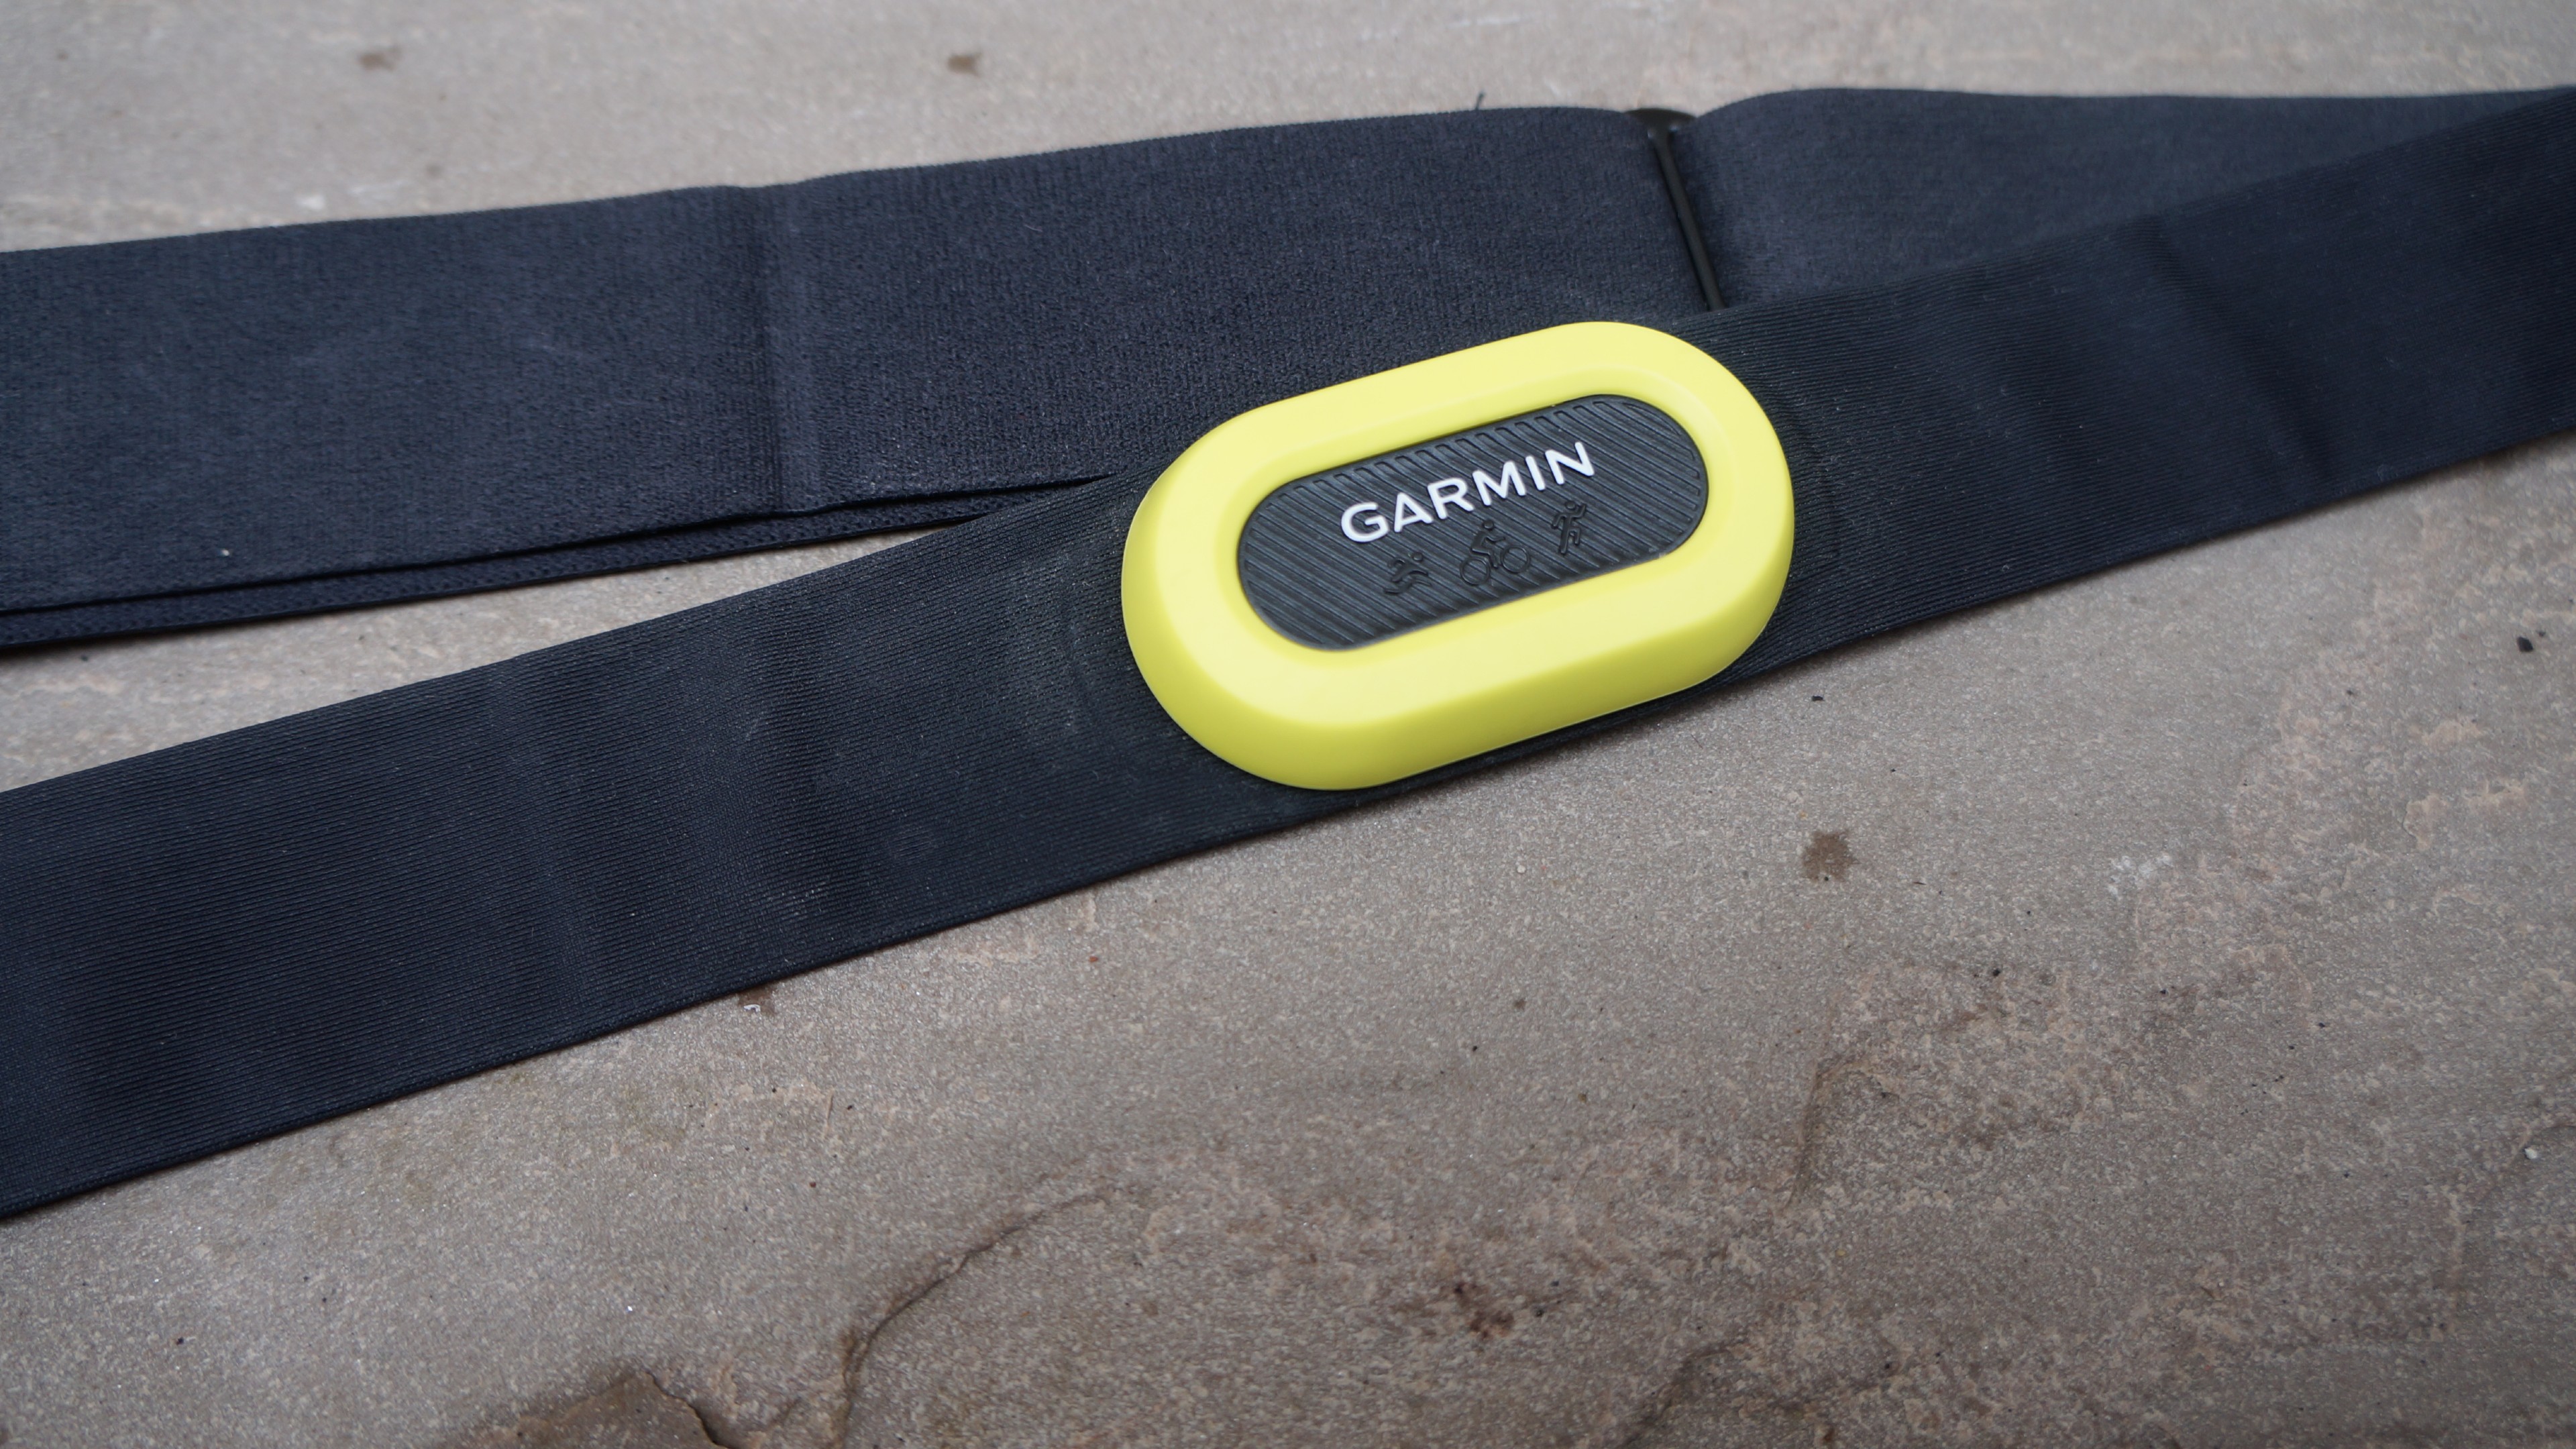  Garmin HRM-Pro Plus and HRM-Pro Premium Chest Strap Heart Rate  Monitors : Sports & Outdoors